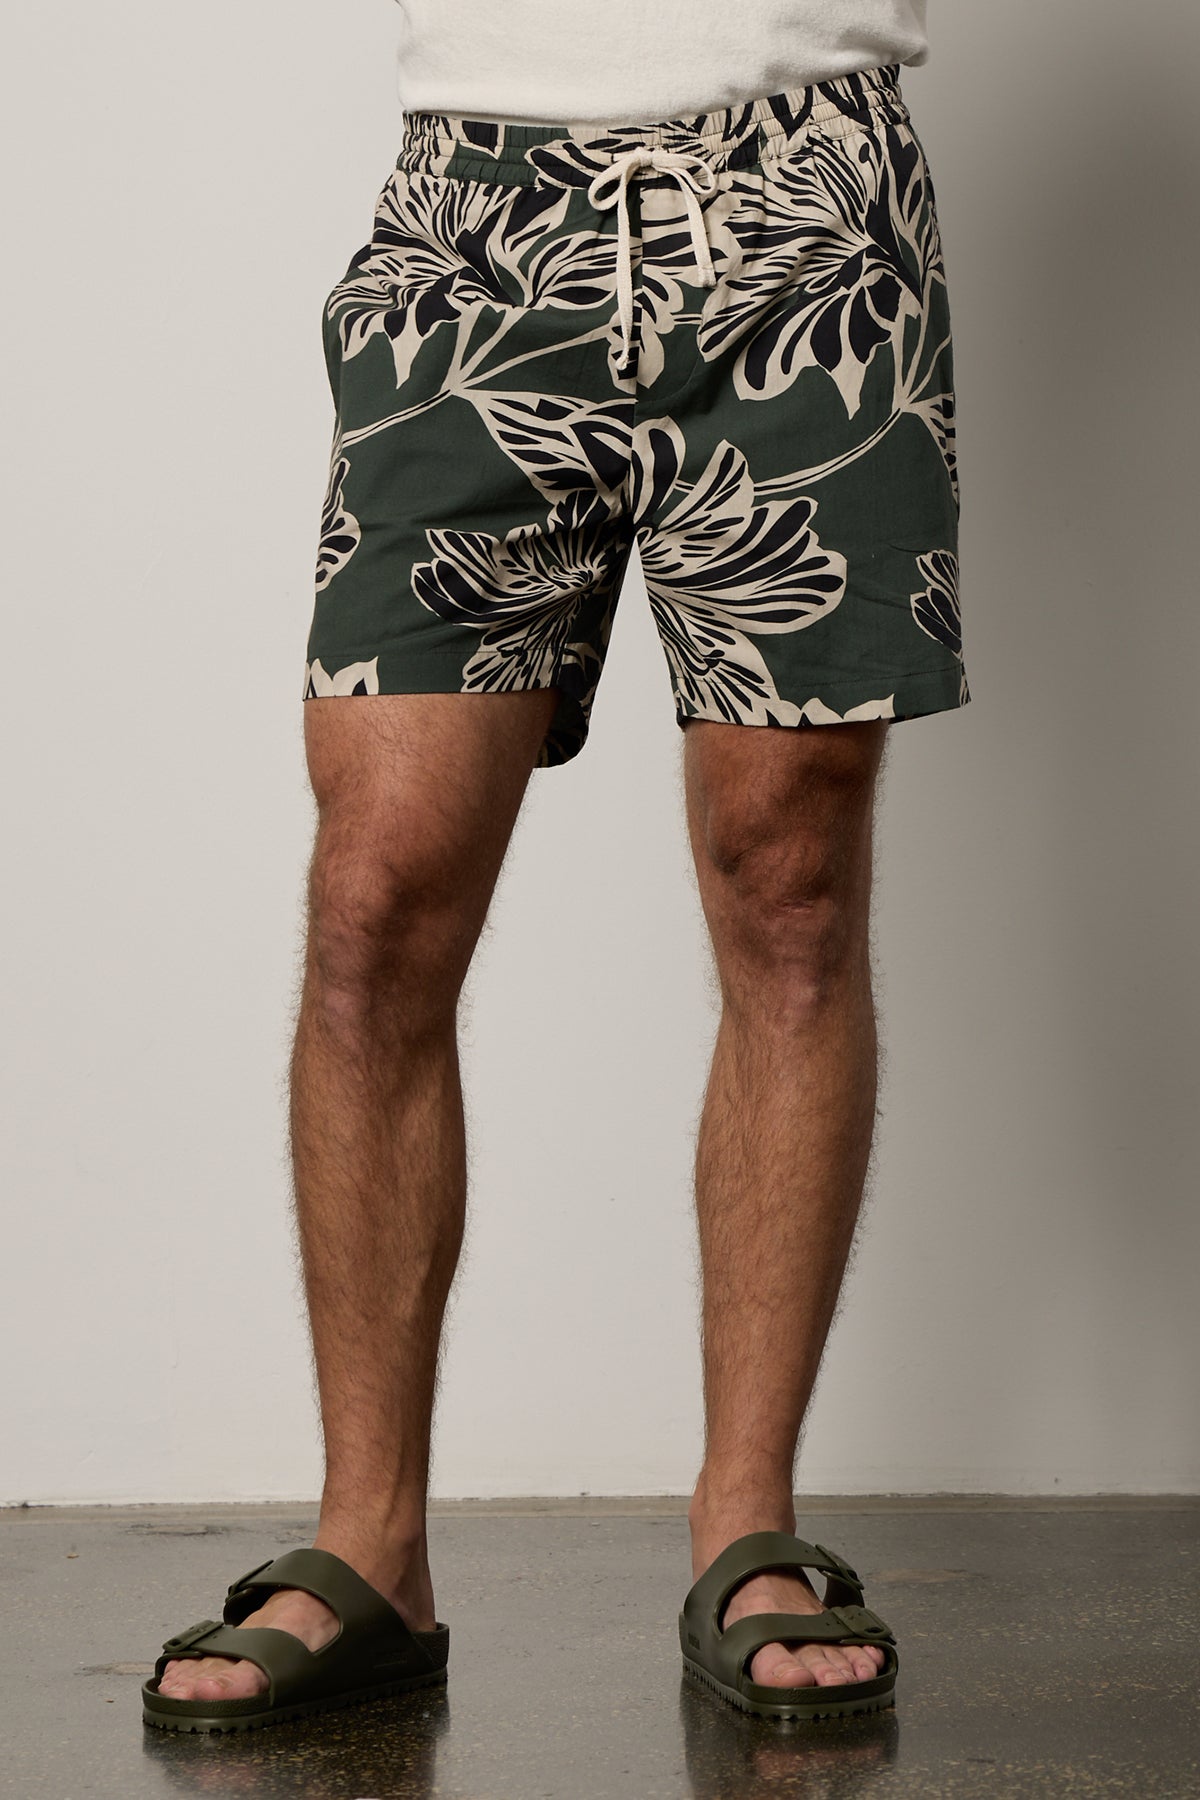 Colt Short front in catalina print with bold, black and cream pattern on dark green background -26266340720833